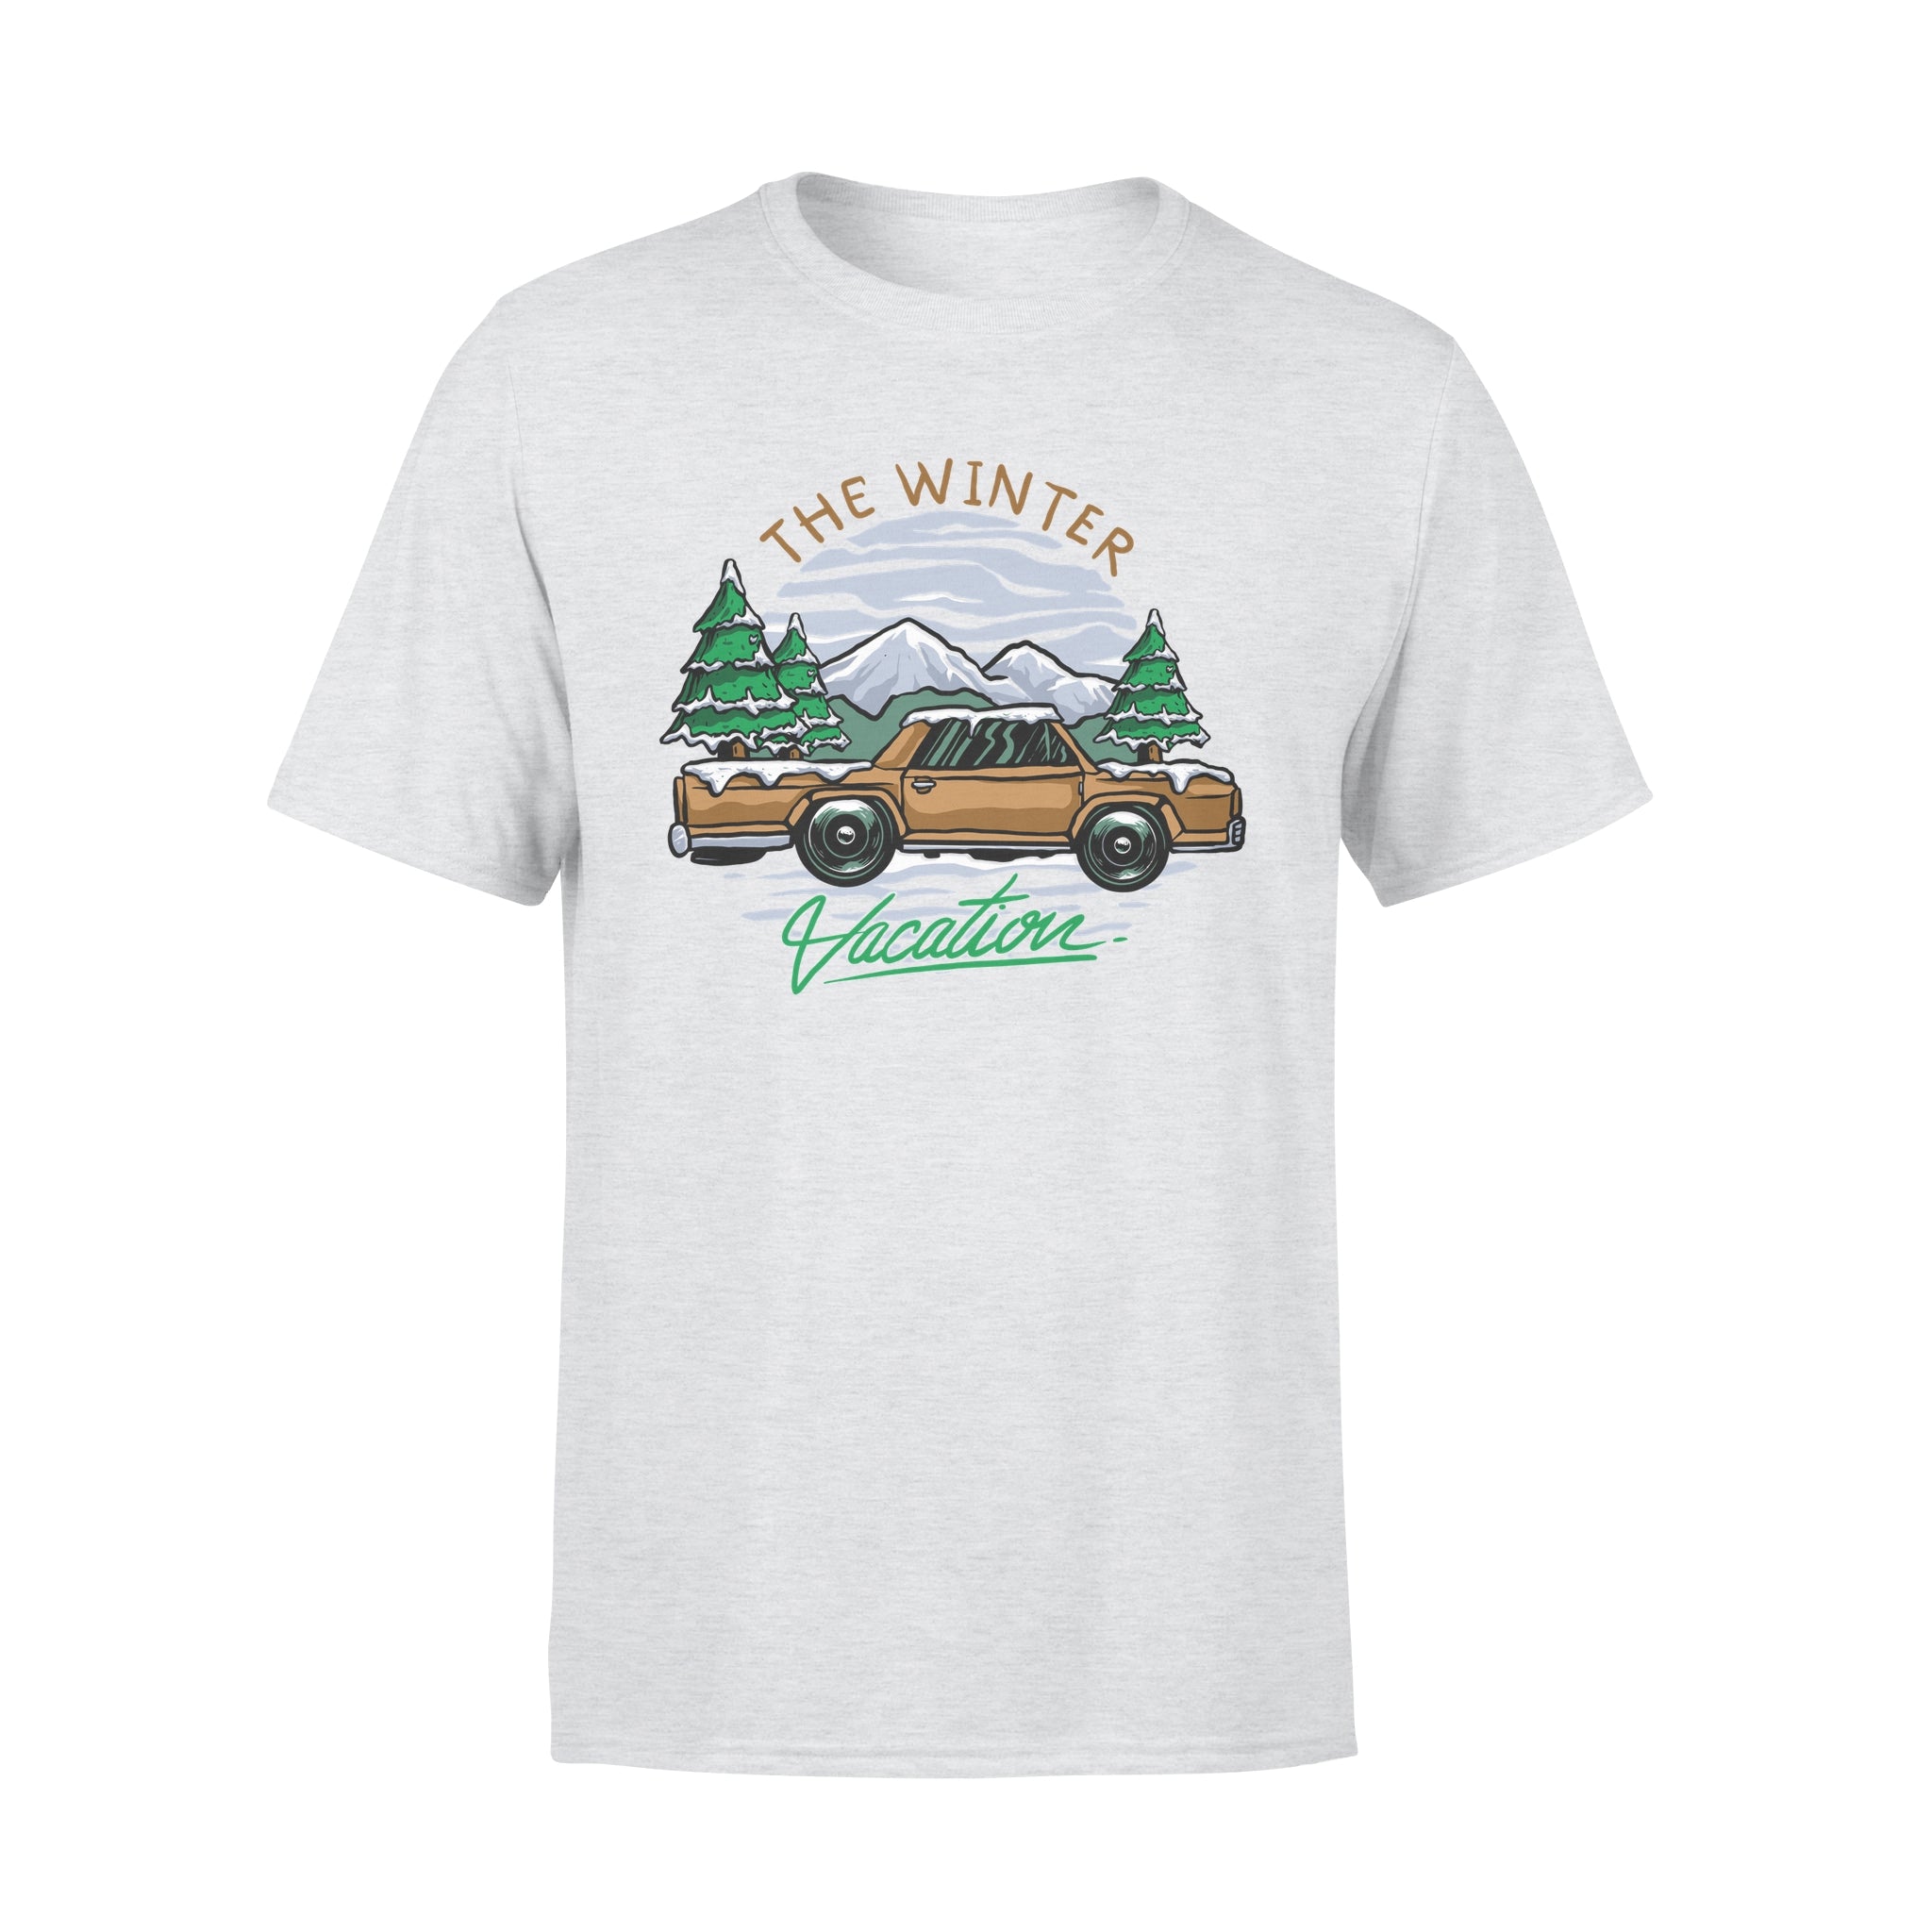 The winter Vacation -  T-shirt